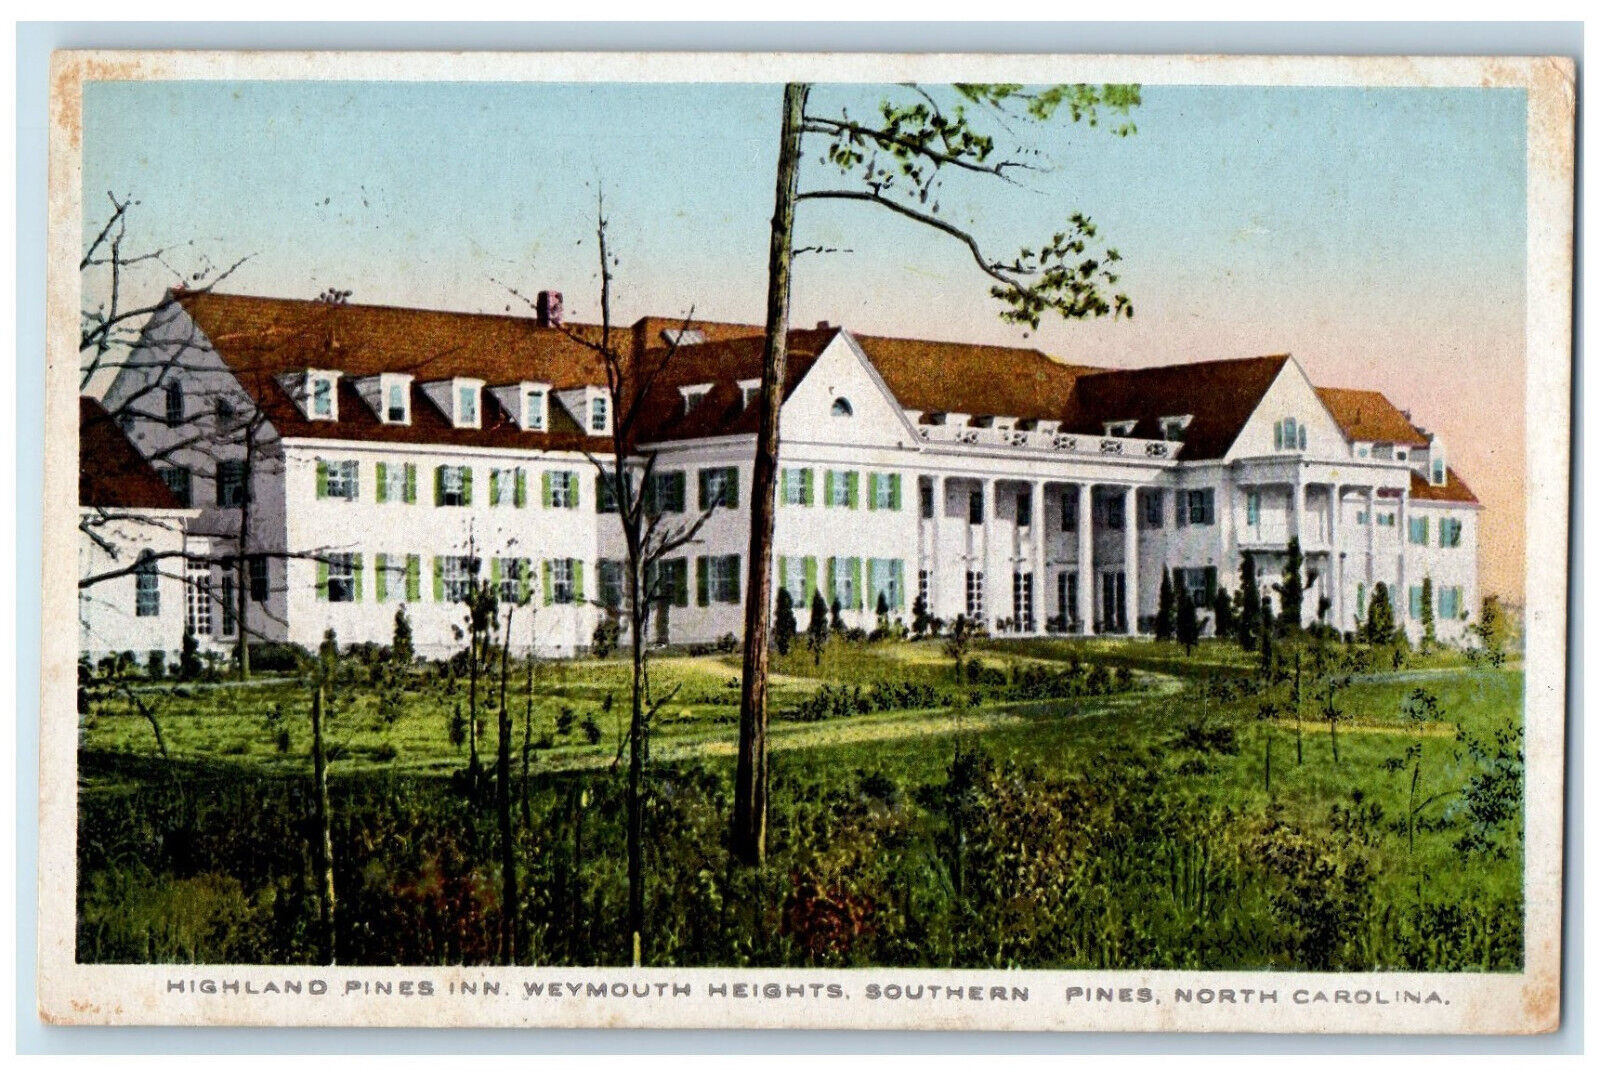 1915 Highland Pines Inn Weymouth Heights Southern Pines NC Antique Postcard